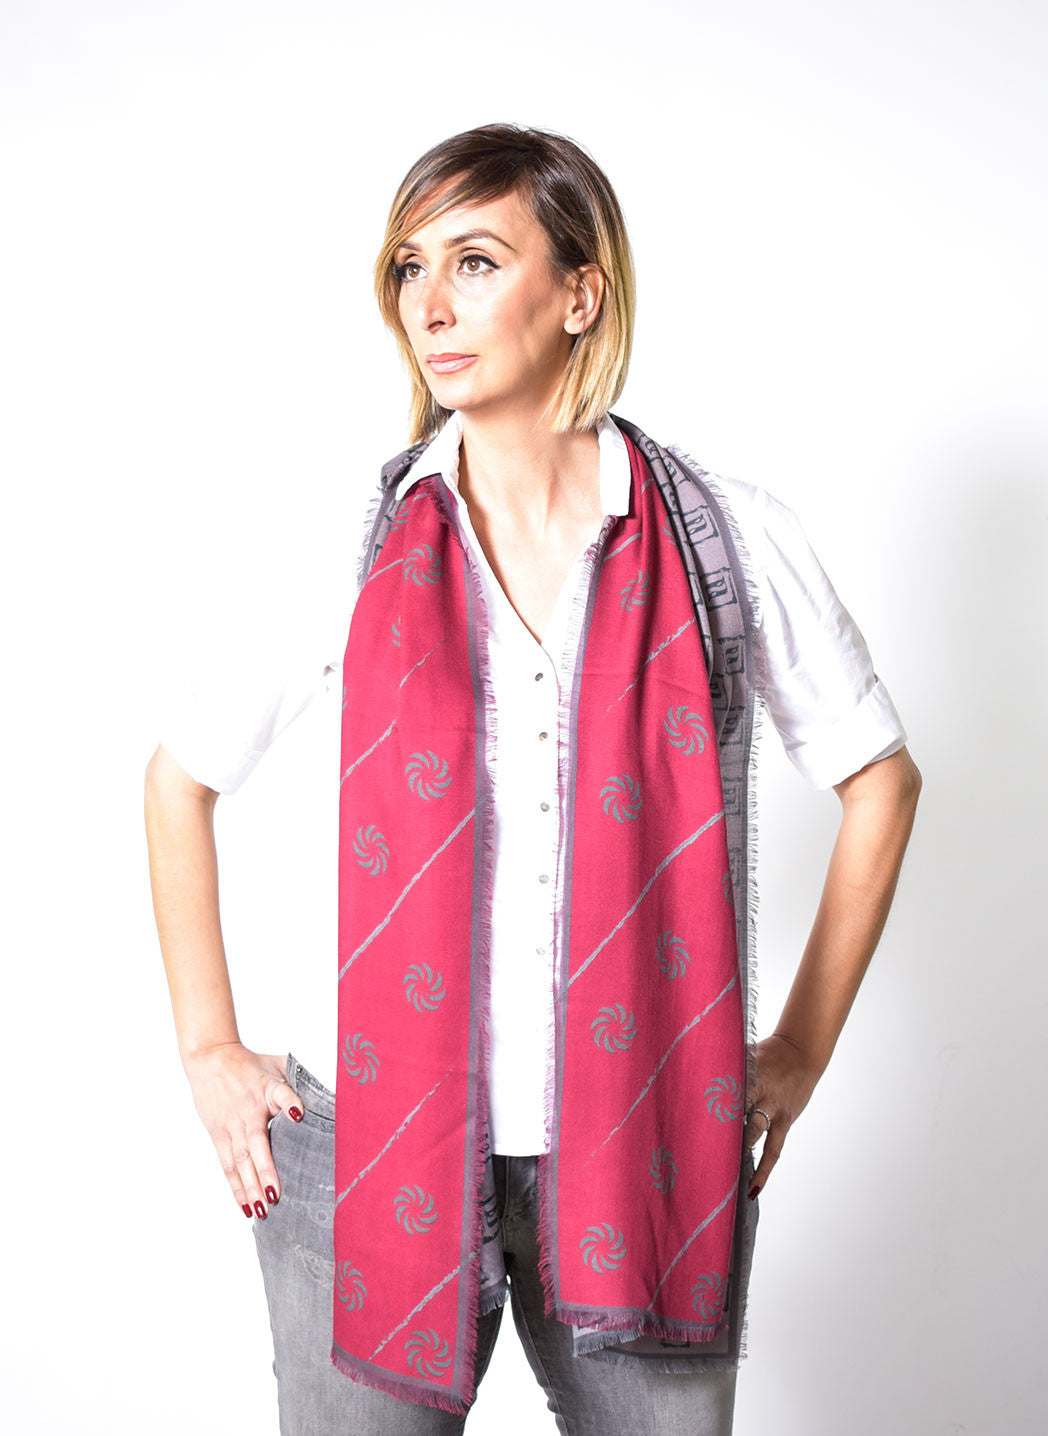 Eternity Burgundy Unisex Scarf - Anet's Collection - 6